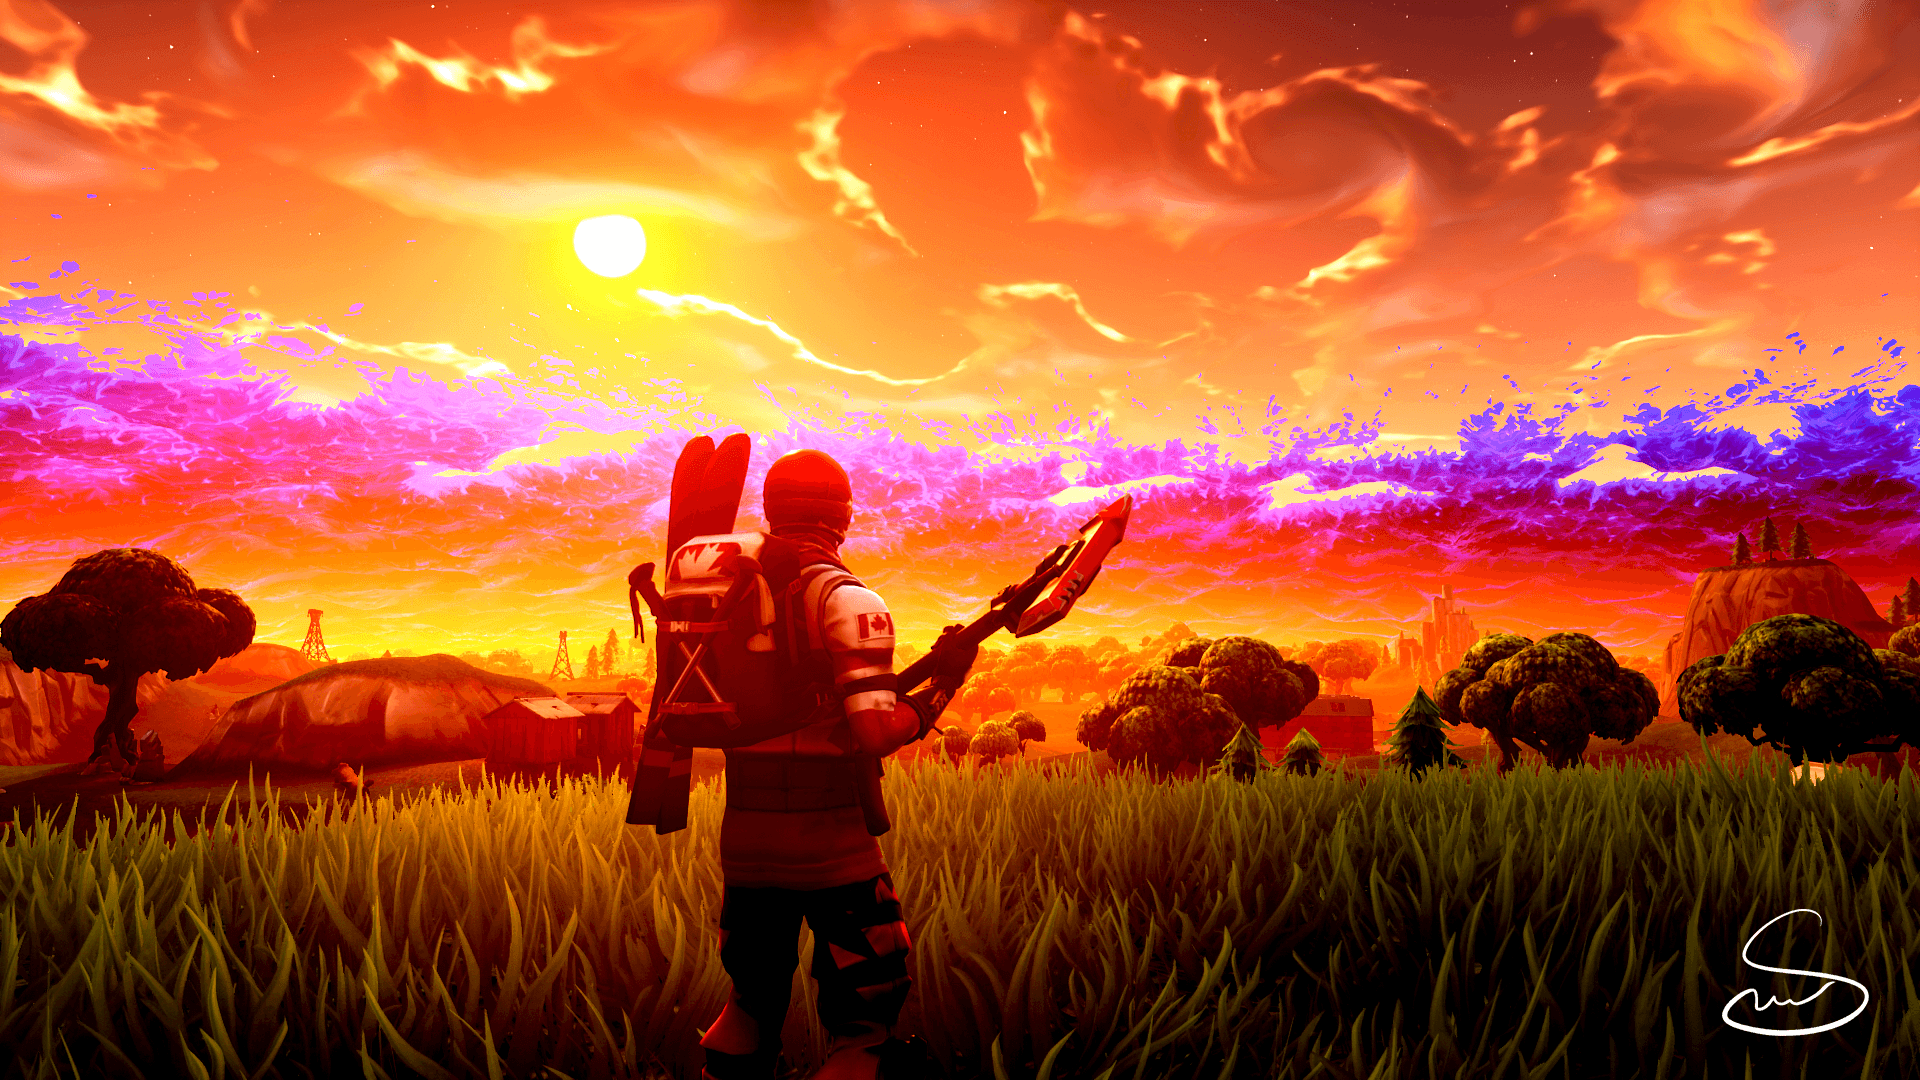 Sunset wallpaper, what do you think?